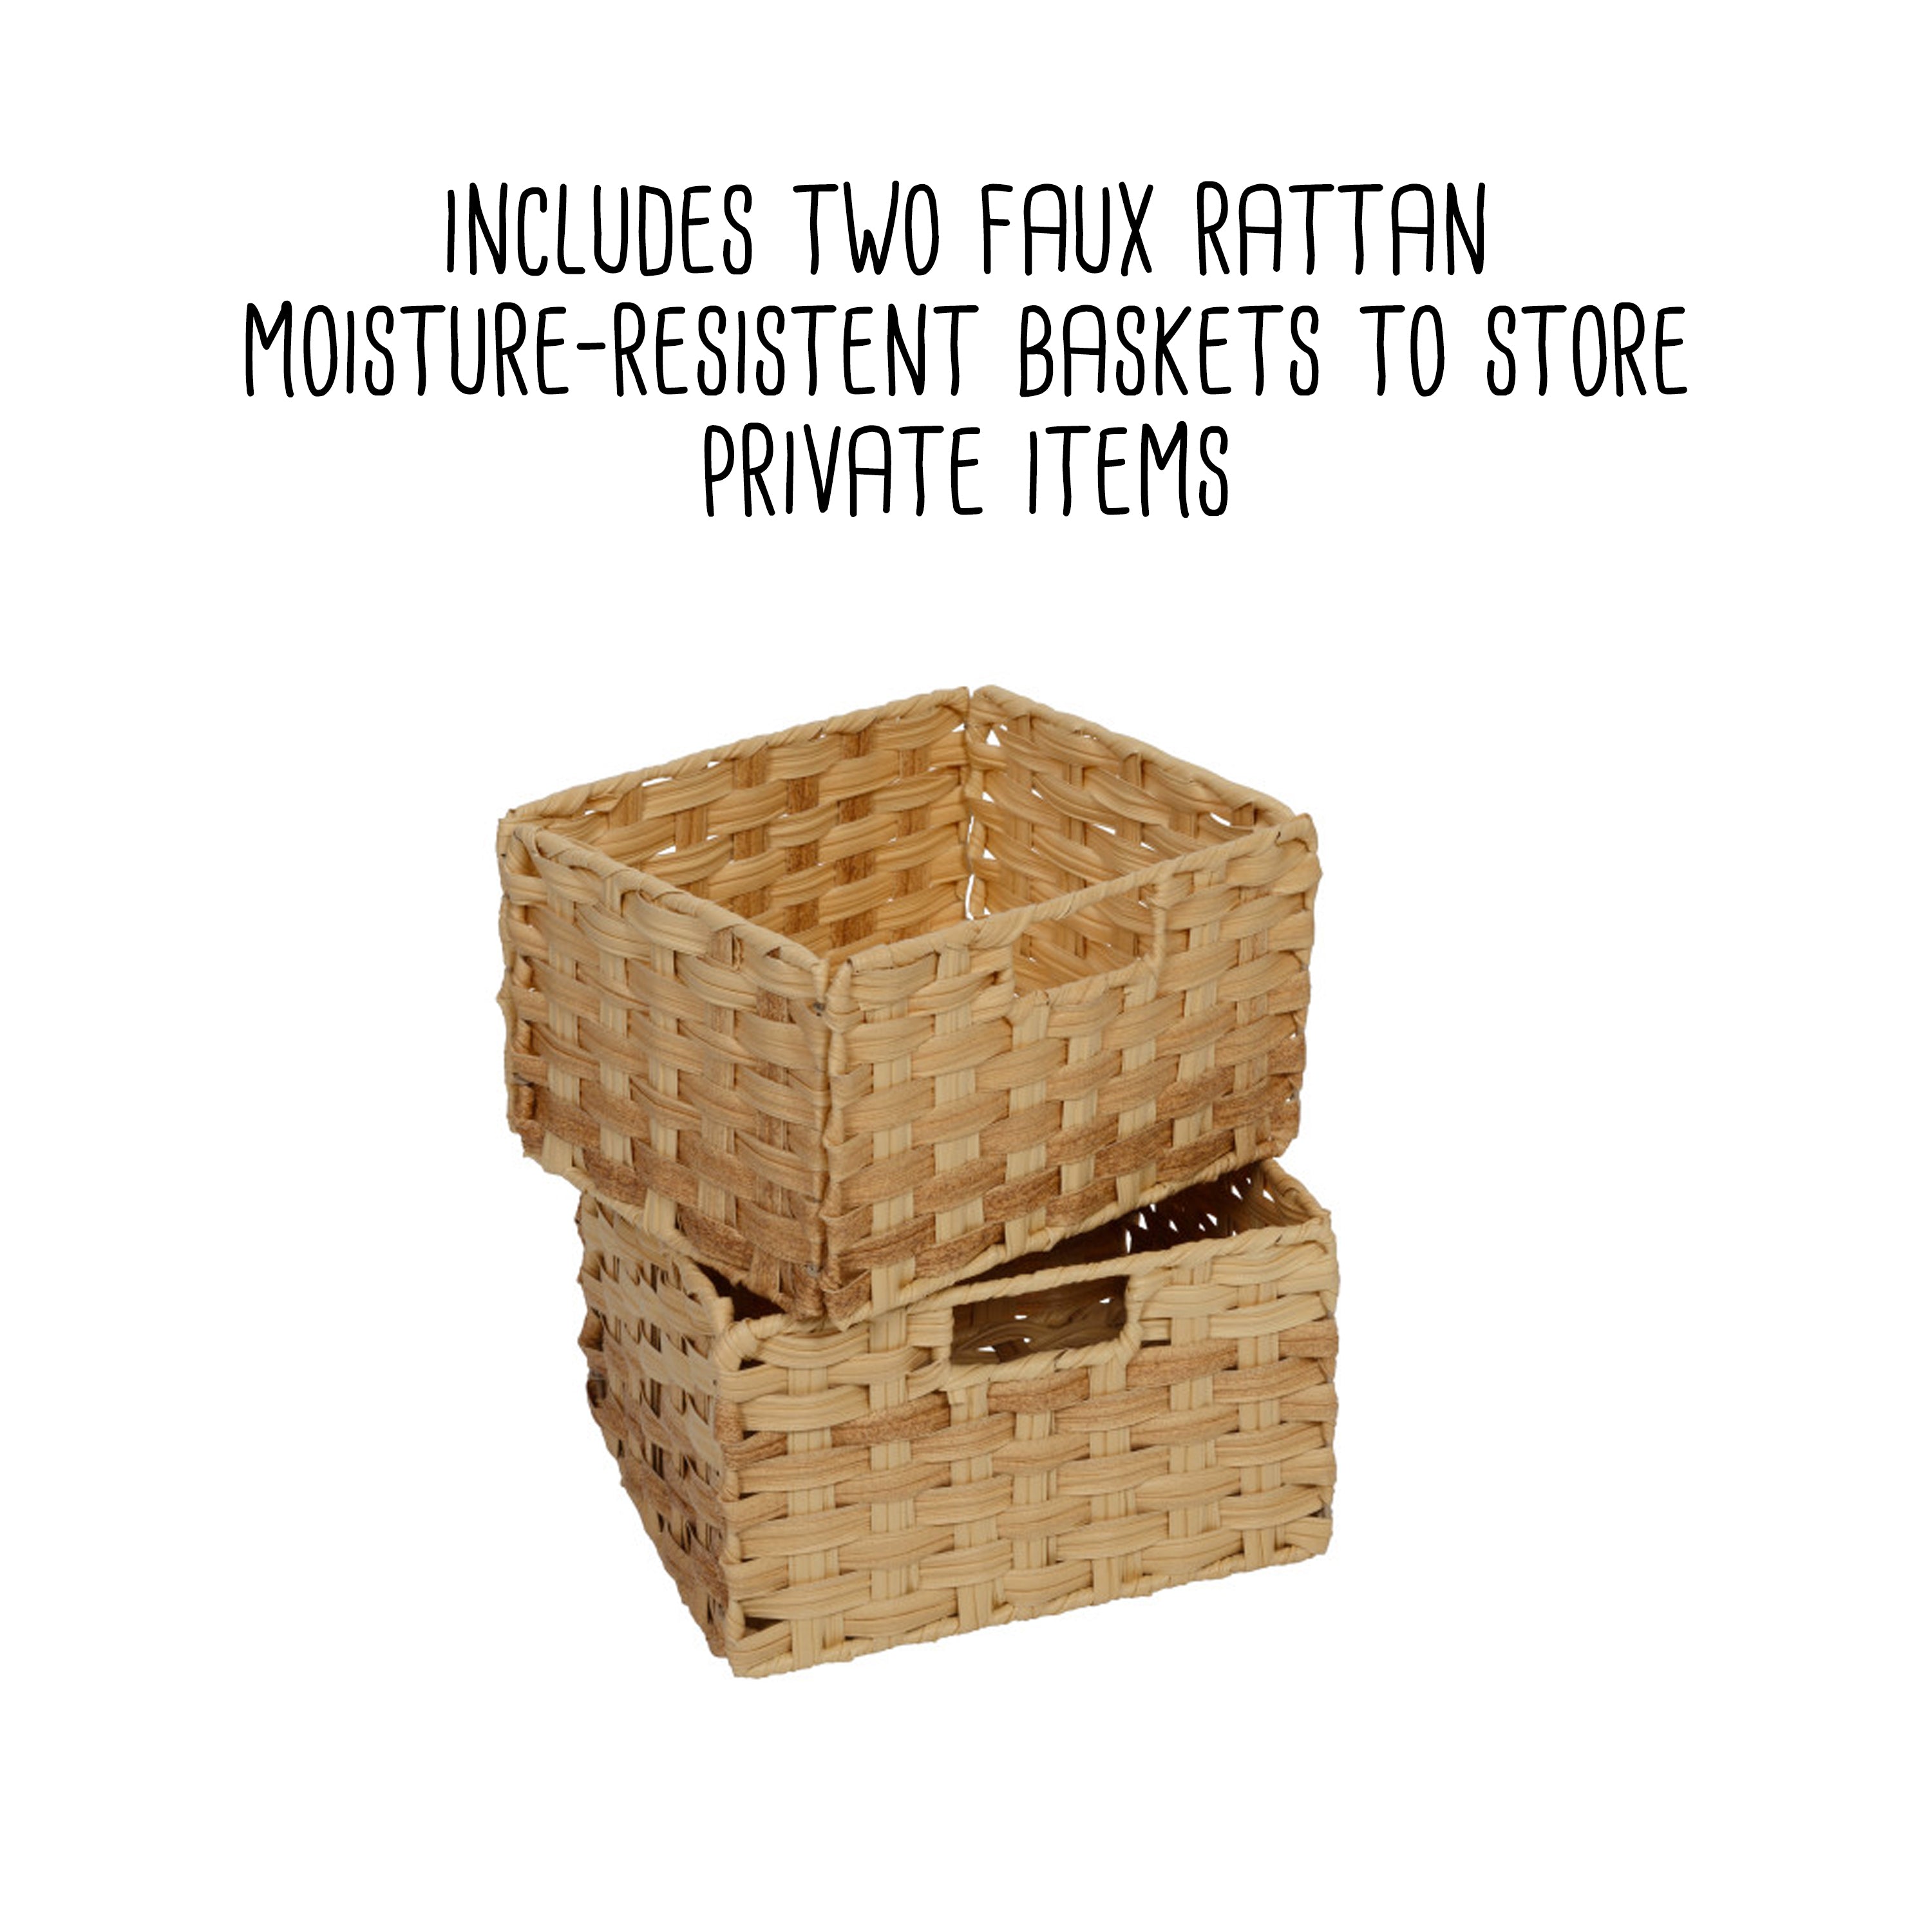 Rattan Plastic Weave Basket, Storage Bins Organizer For Closet, Shelf,  Kitchen, Pantry And Bathroom - Ideal For Makeup, Cosmetics, Hair Supplies,  And